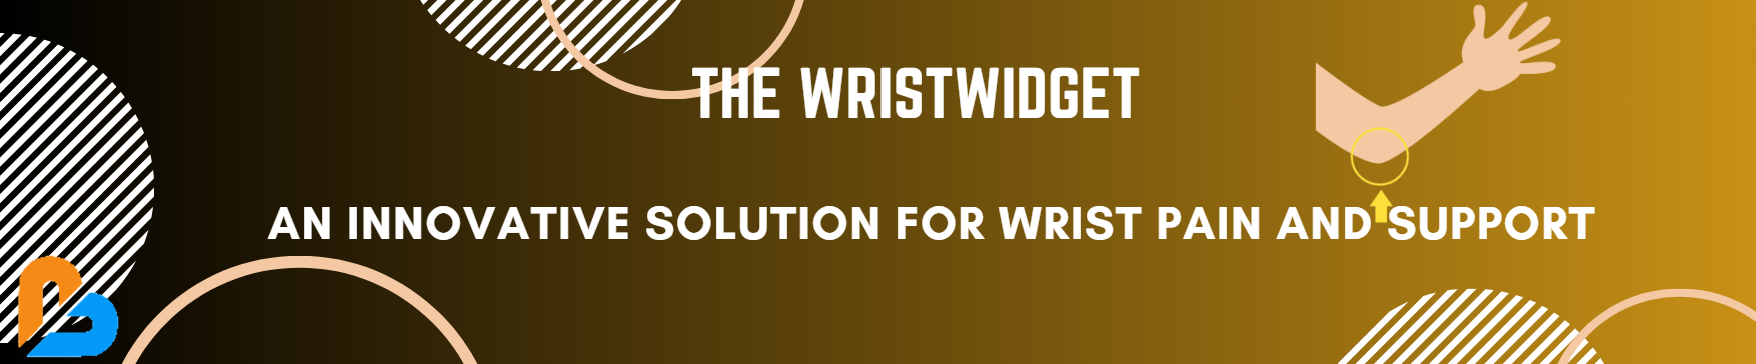 The WristWidget: An Innovative Solution for Wrist Pain and Support